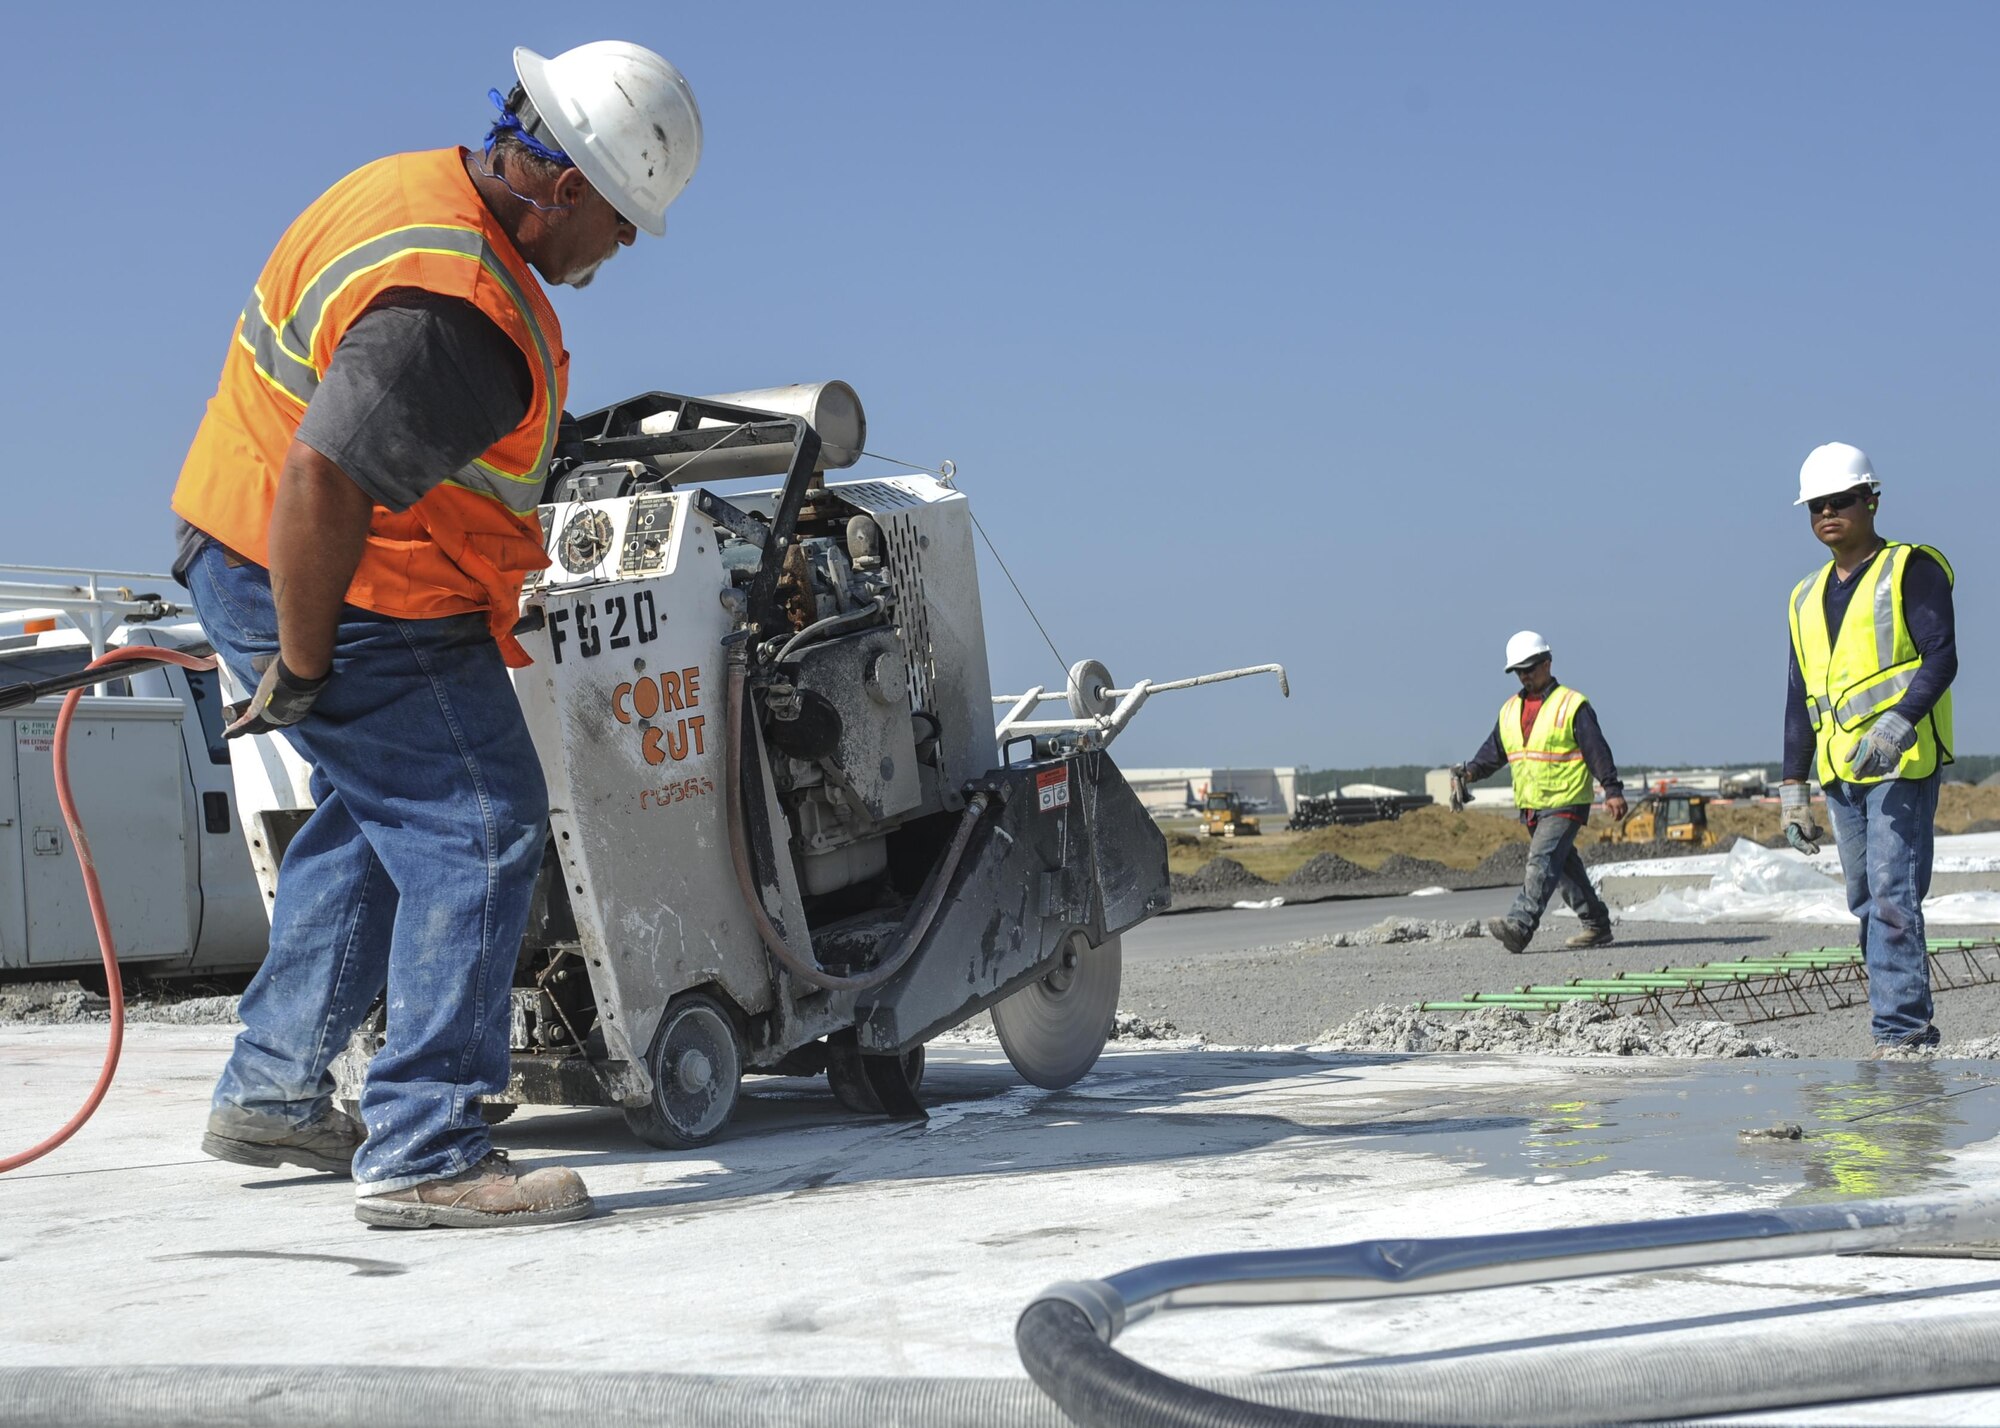 Mark Roncal, an Advanced Cutting Concrete and Sealing contractor, cuts concrete on the runway construction site June 21, 2016, at Little Rock Air Force Base, Ark. A section of Little Rock AFB runway is receiving an update from its original 1955 build. (U.S. Air Force photo by Senior Airman Mercedes Taylor) 